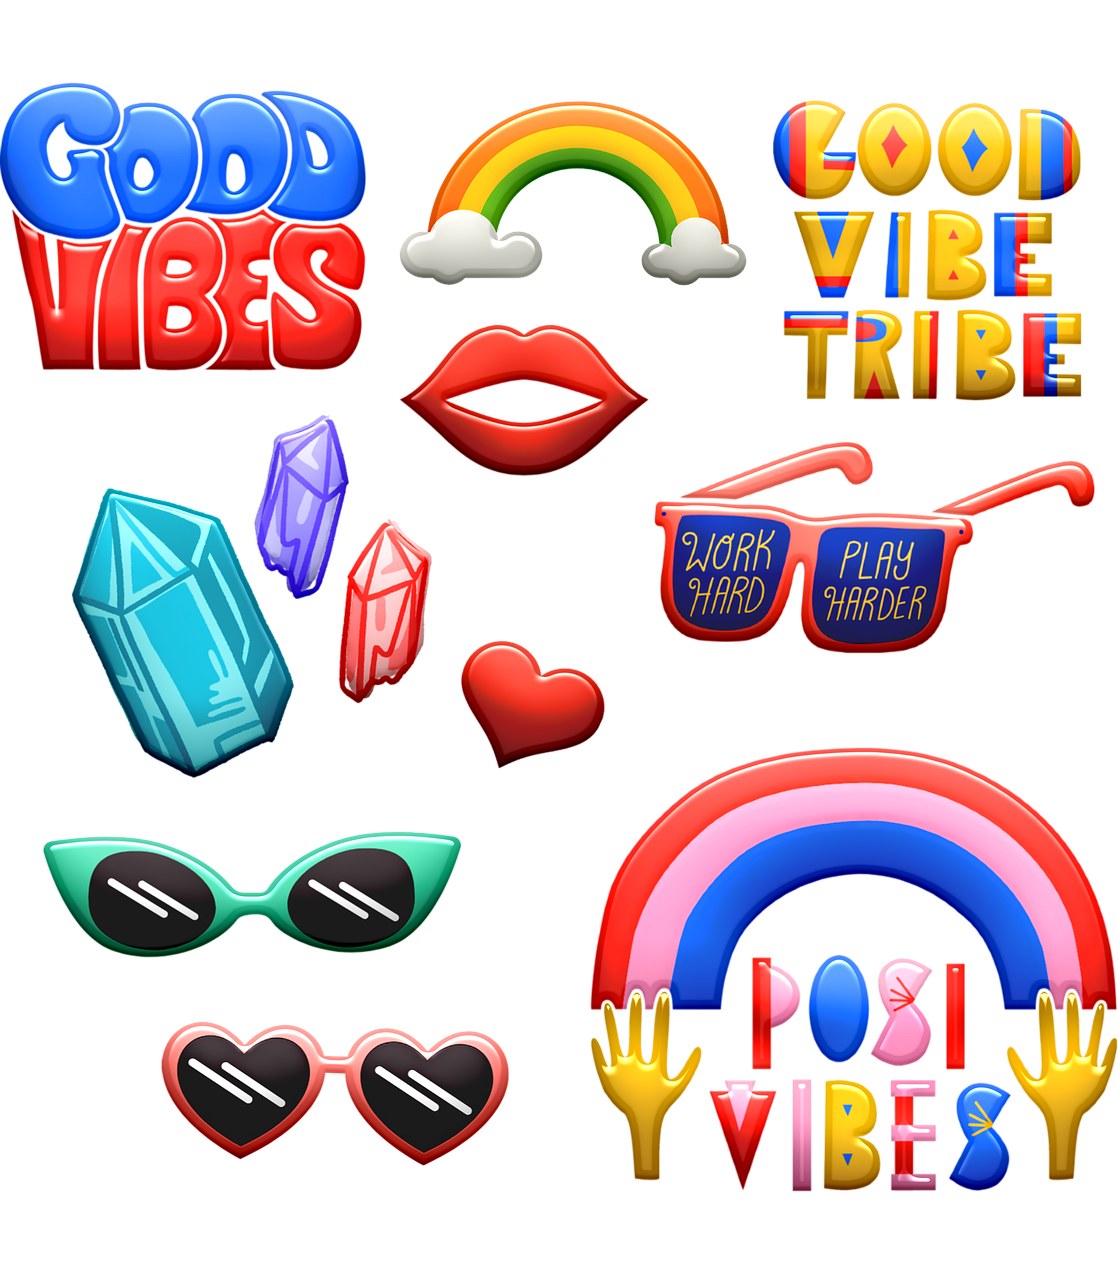 a bunch of stickers that say good vibes, concept art, by Robbie Trevino, 3 d icon for mobile game, roygbiv, bohemian digitals, glossy digital painting